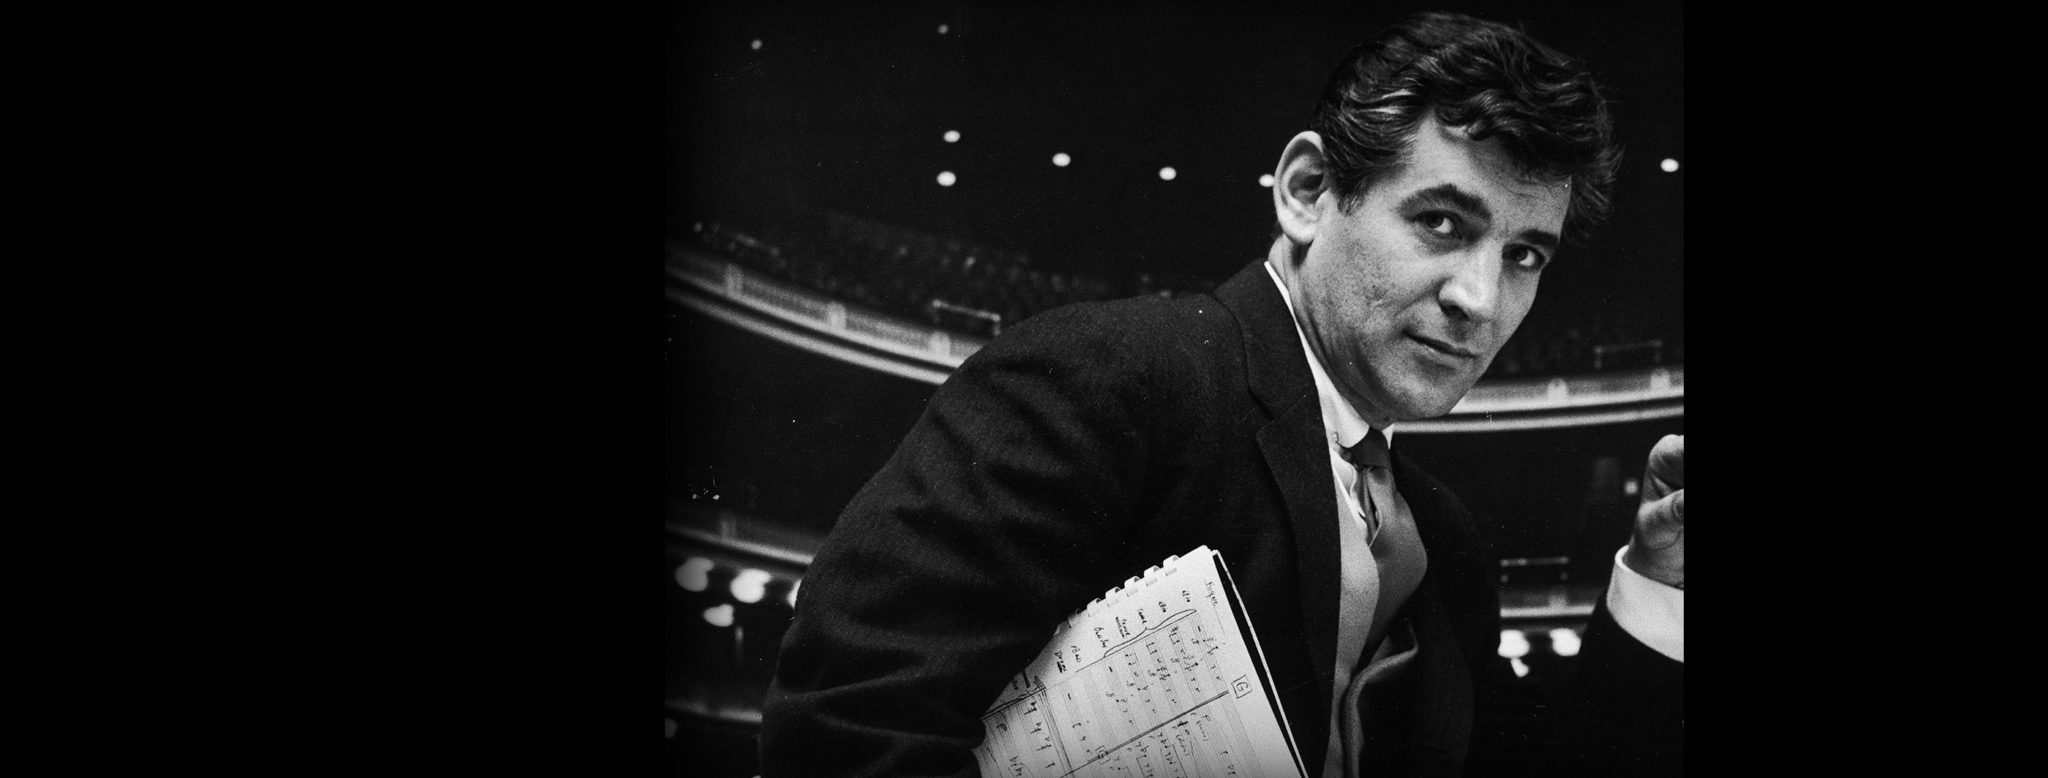 Composer Leonard Bernstein, holding musical score with lighted auditorium behind him. / Credit: Gordon Parks/The LIFE Picture Collection/Getty Images